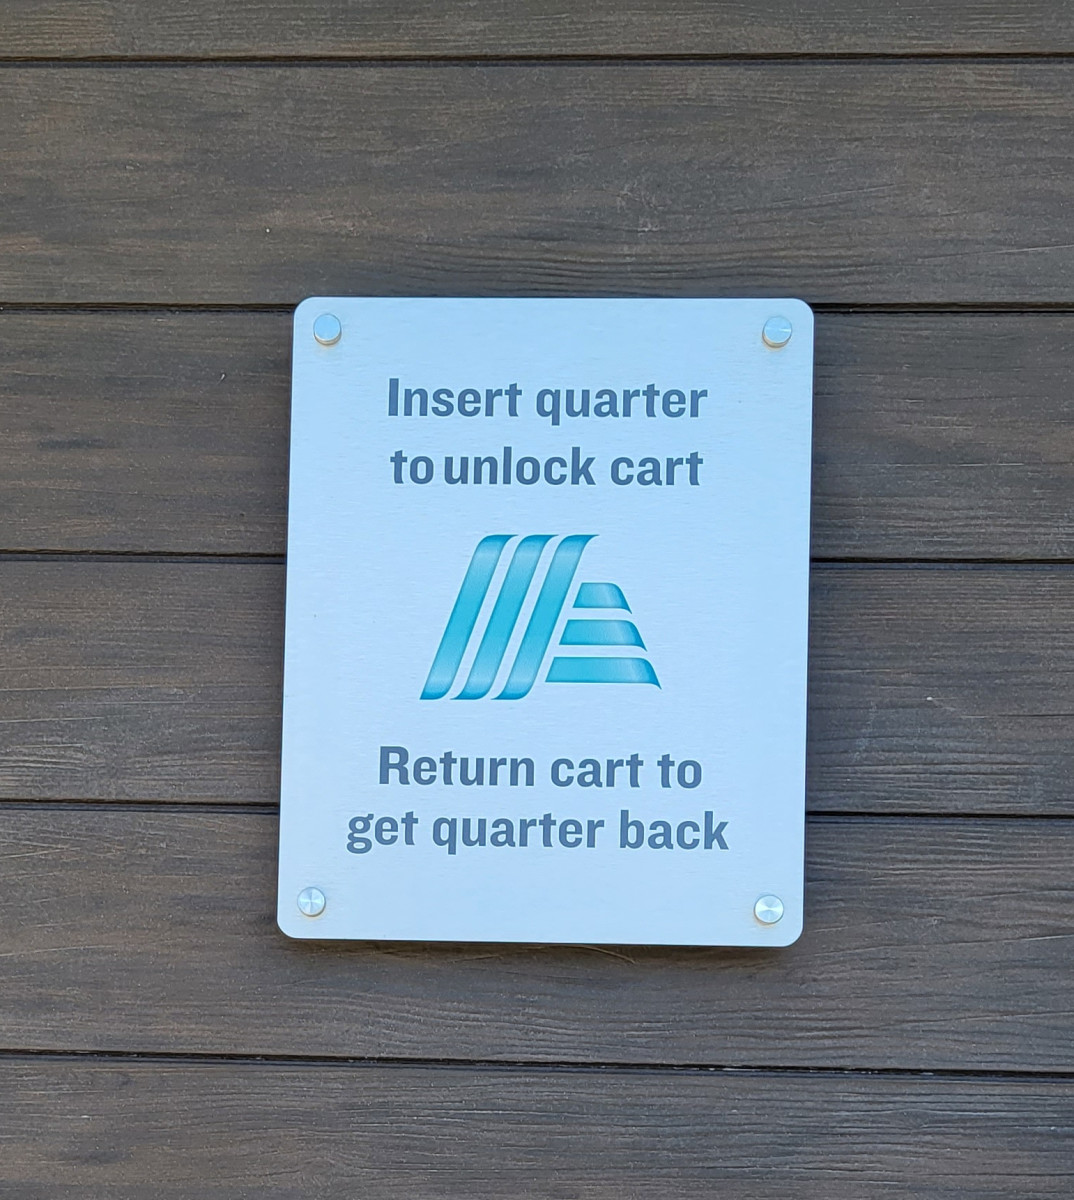 The store has excellent signs telling you about their cart procedure. Amazingly, the quarter return program really does encourage shoppers to return their carts.